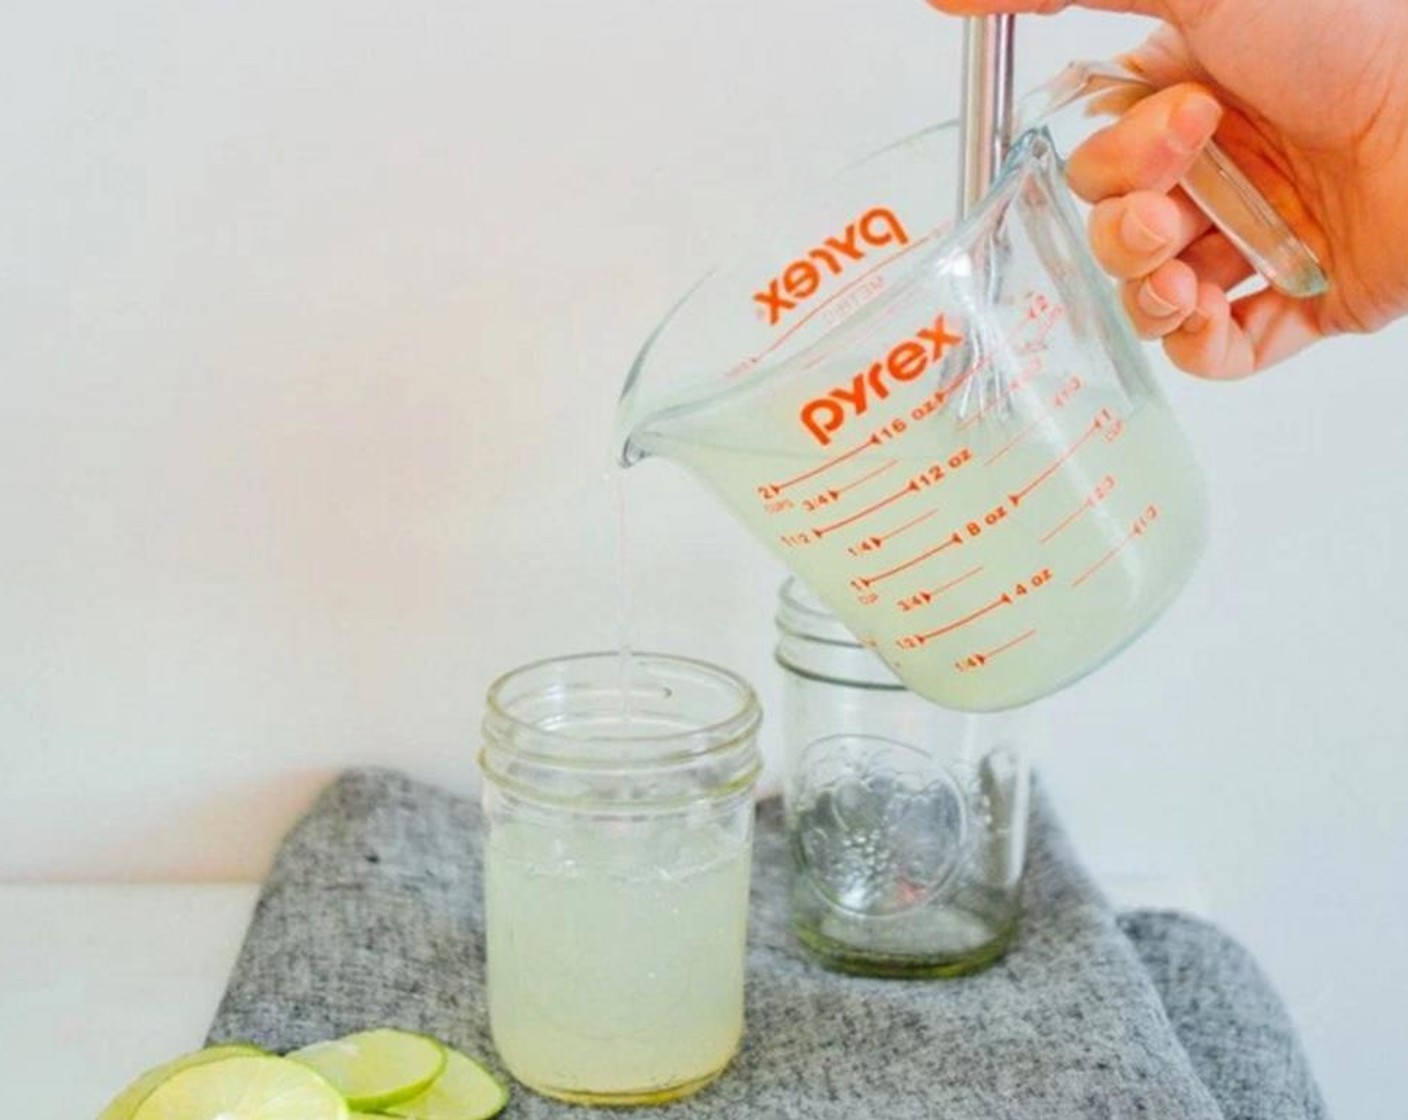 step 1 Fill 3/4 of your glass with Limeade (16 fl oz).